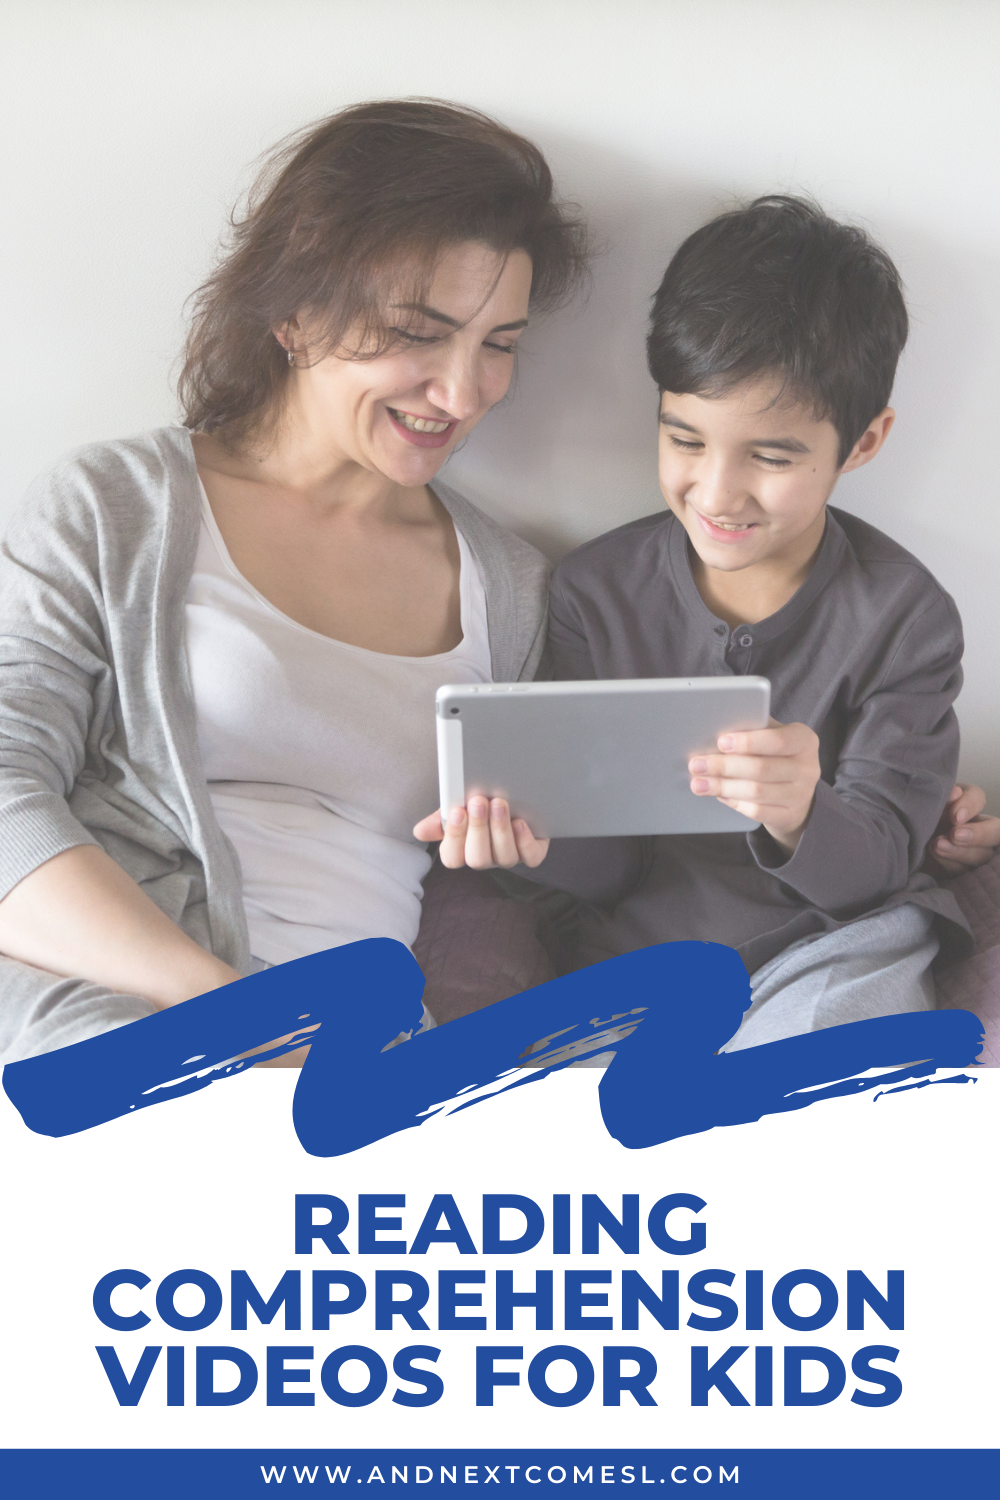 These reading comprehension videos teach kids different comprehension strategies and skills